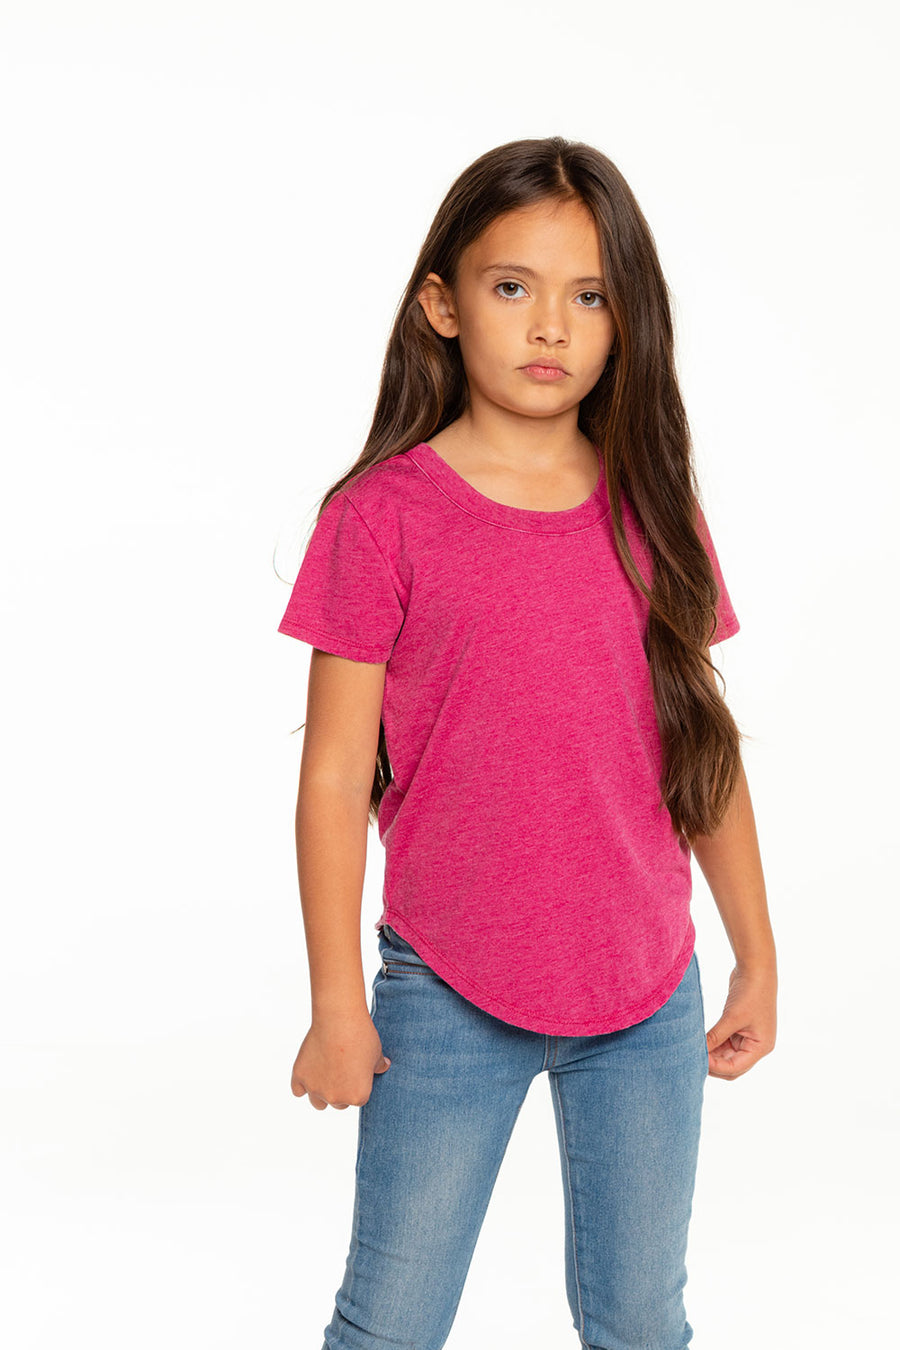 Girls Recycled Vintage Jersey Short Sleeve Scoop Back Shirt BCA - chaserbrand